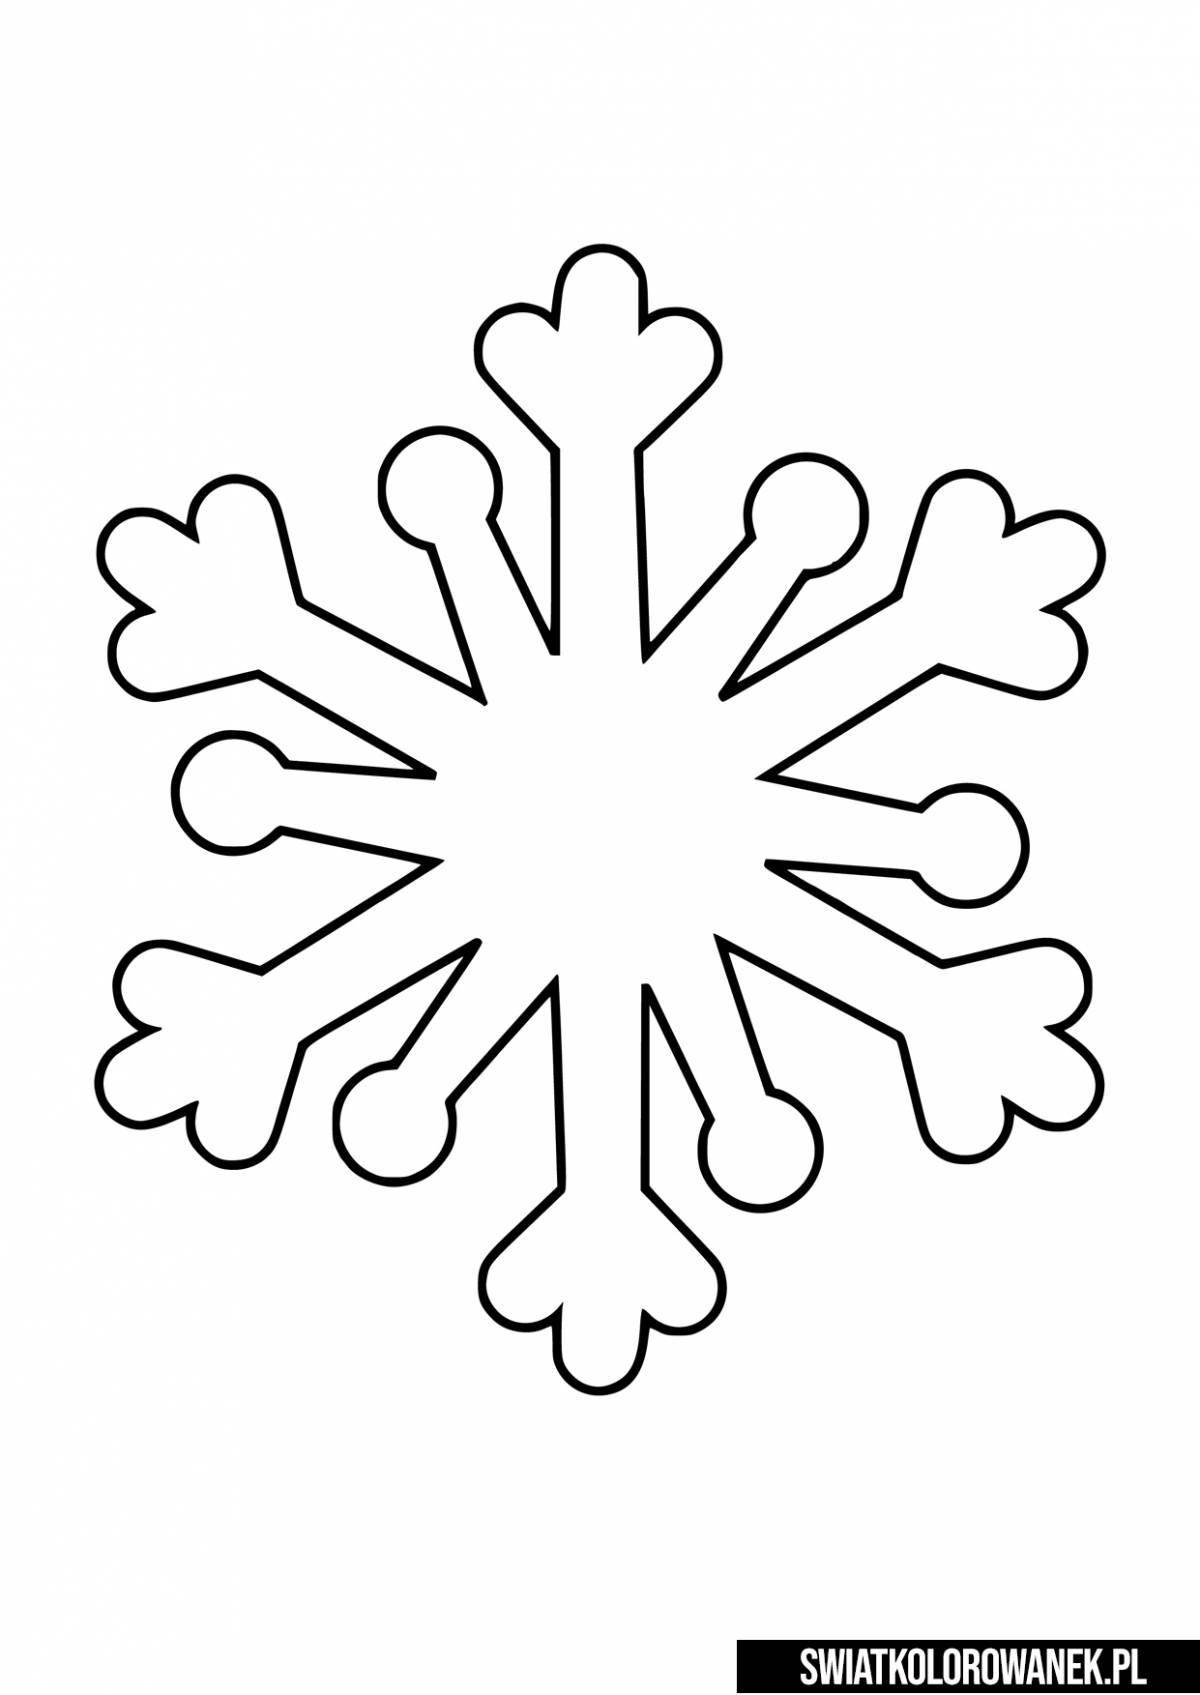 Exquisite snowflake coloring book for kids